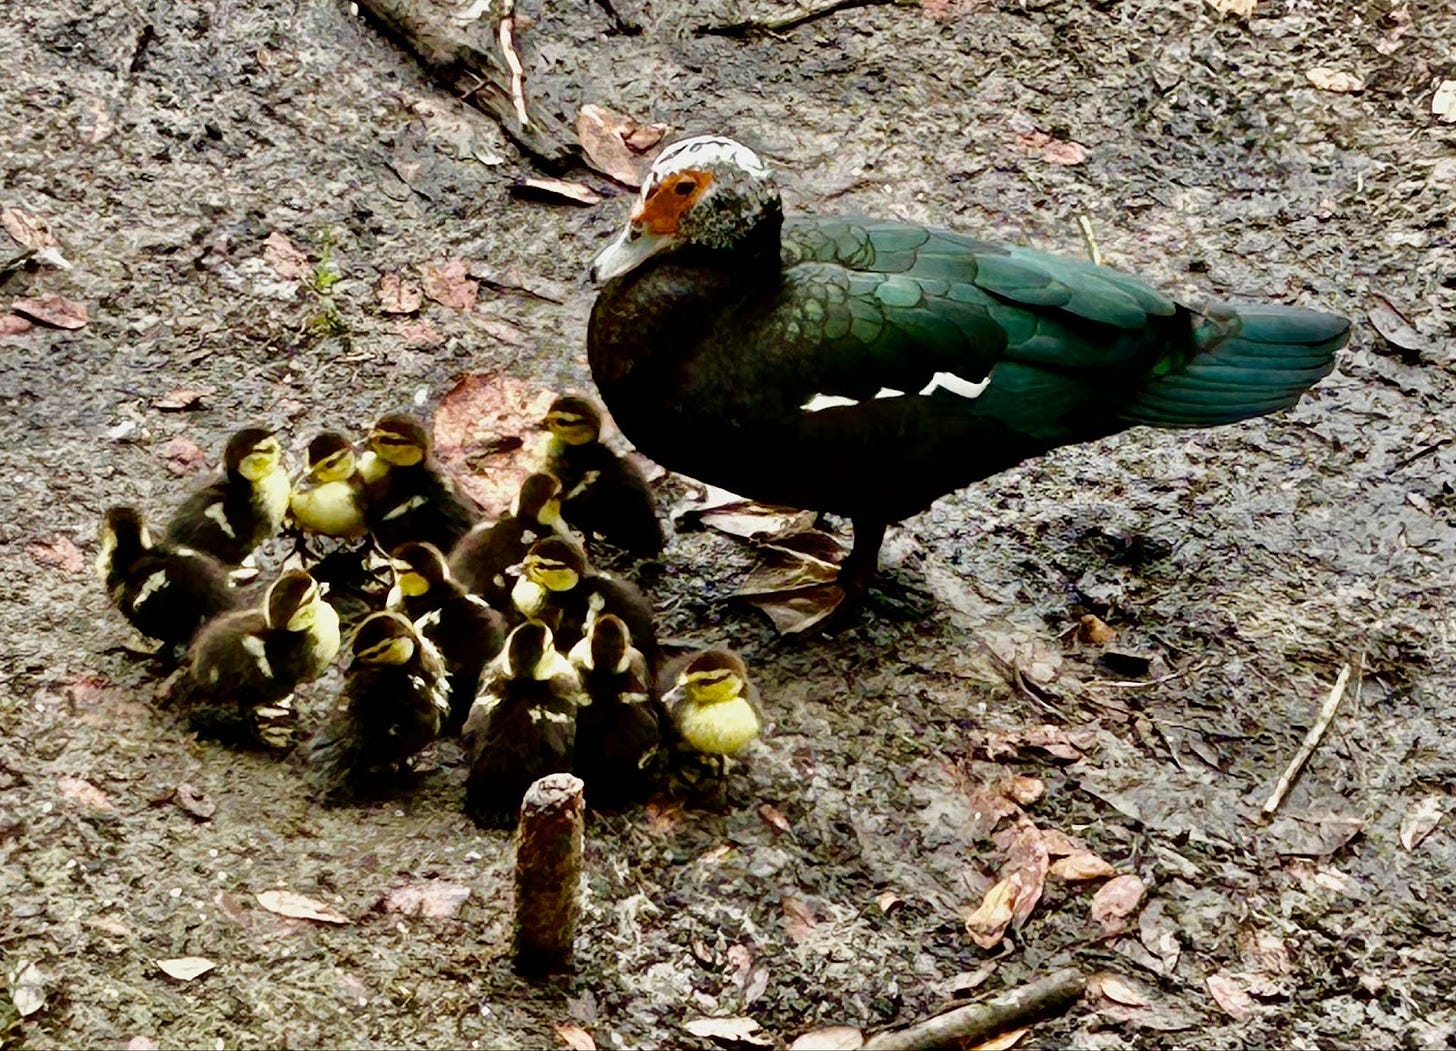 mother duck with brood of small yellow ducklings on muddy background